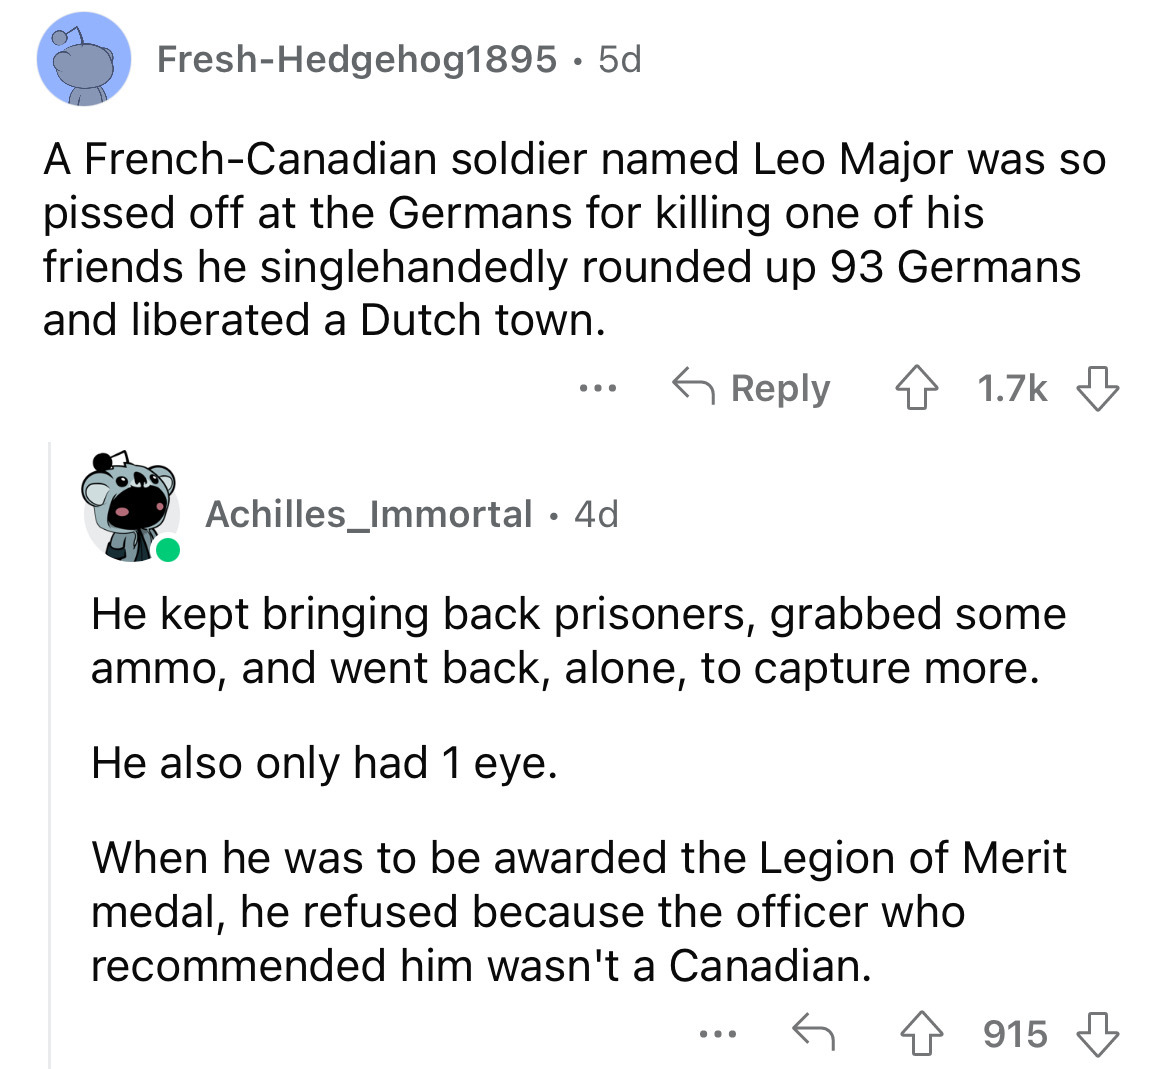 angle - FreshHedgehog1895. 5d A FrenchCanadian soldier named Leo Major was so pissed off at the Germans for killing one of his friends he singlehandedly rounded up 93 Germans and liberated a Dutch town. 4 Achilles_Immortal 4d He kept bringing back prisone